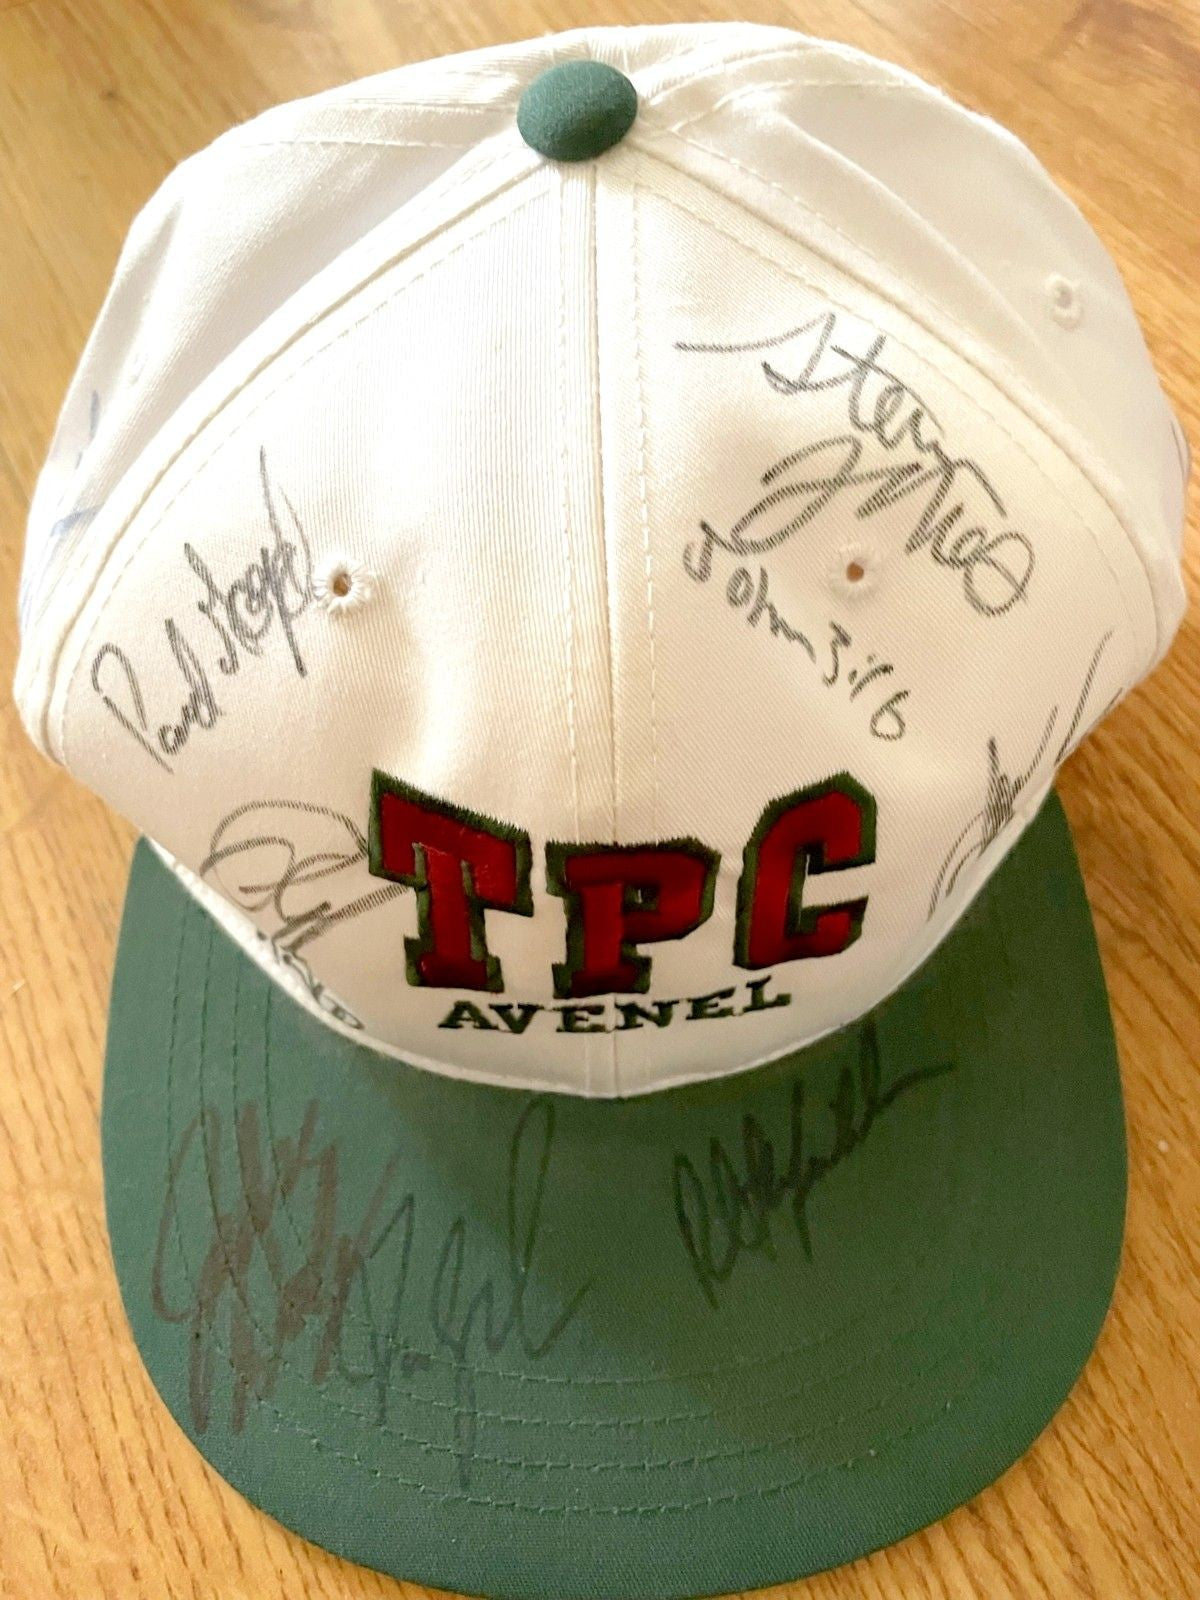 Phil Mickelson Fred Couples Ben Crenshaw John Daly Ernie Els Tom Kite autographed TPC Avenel golf cap or hat JSA